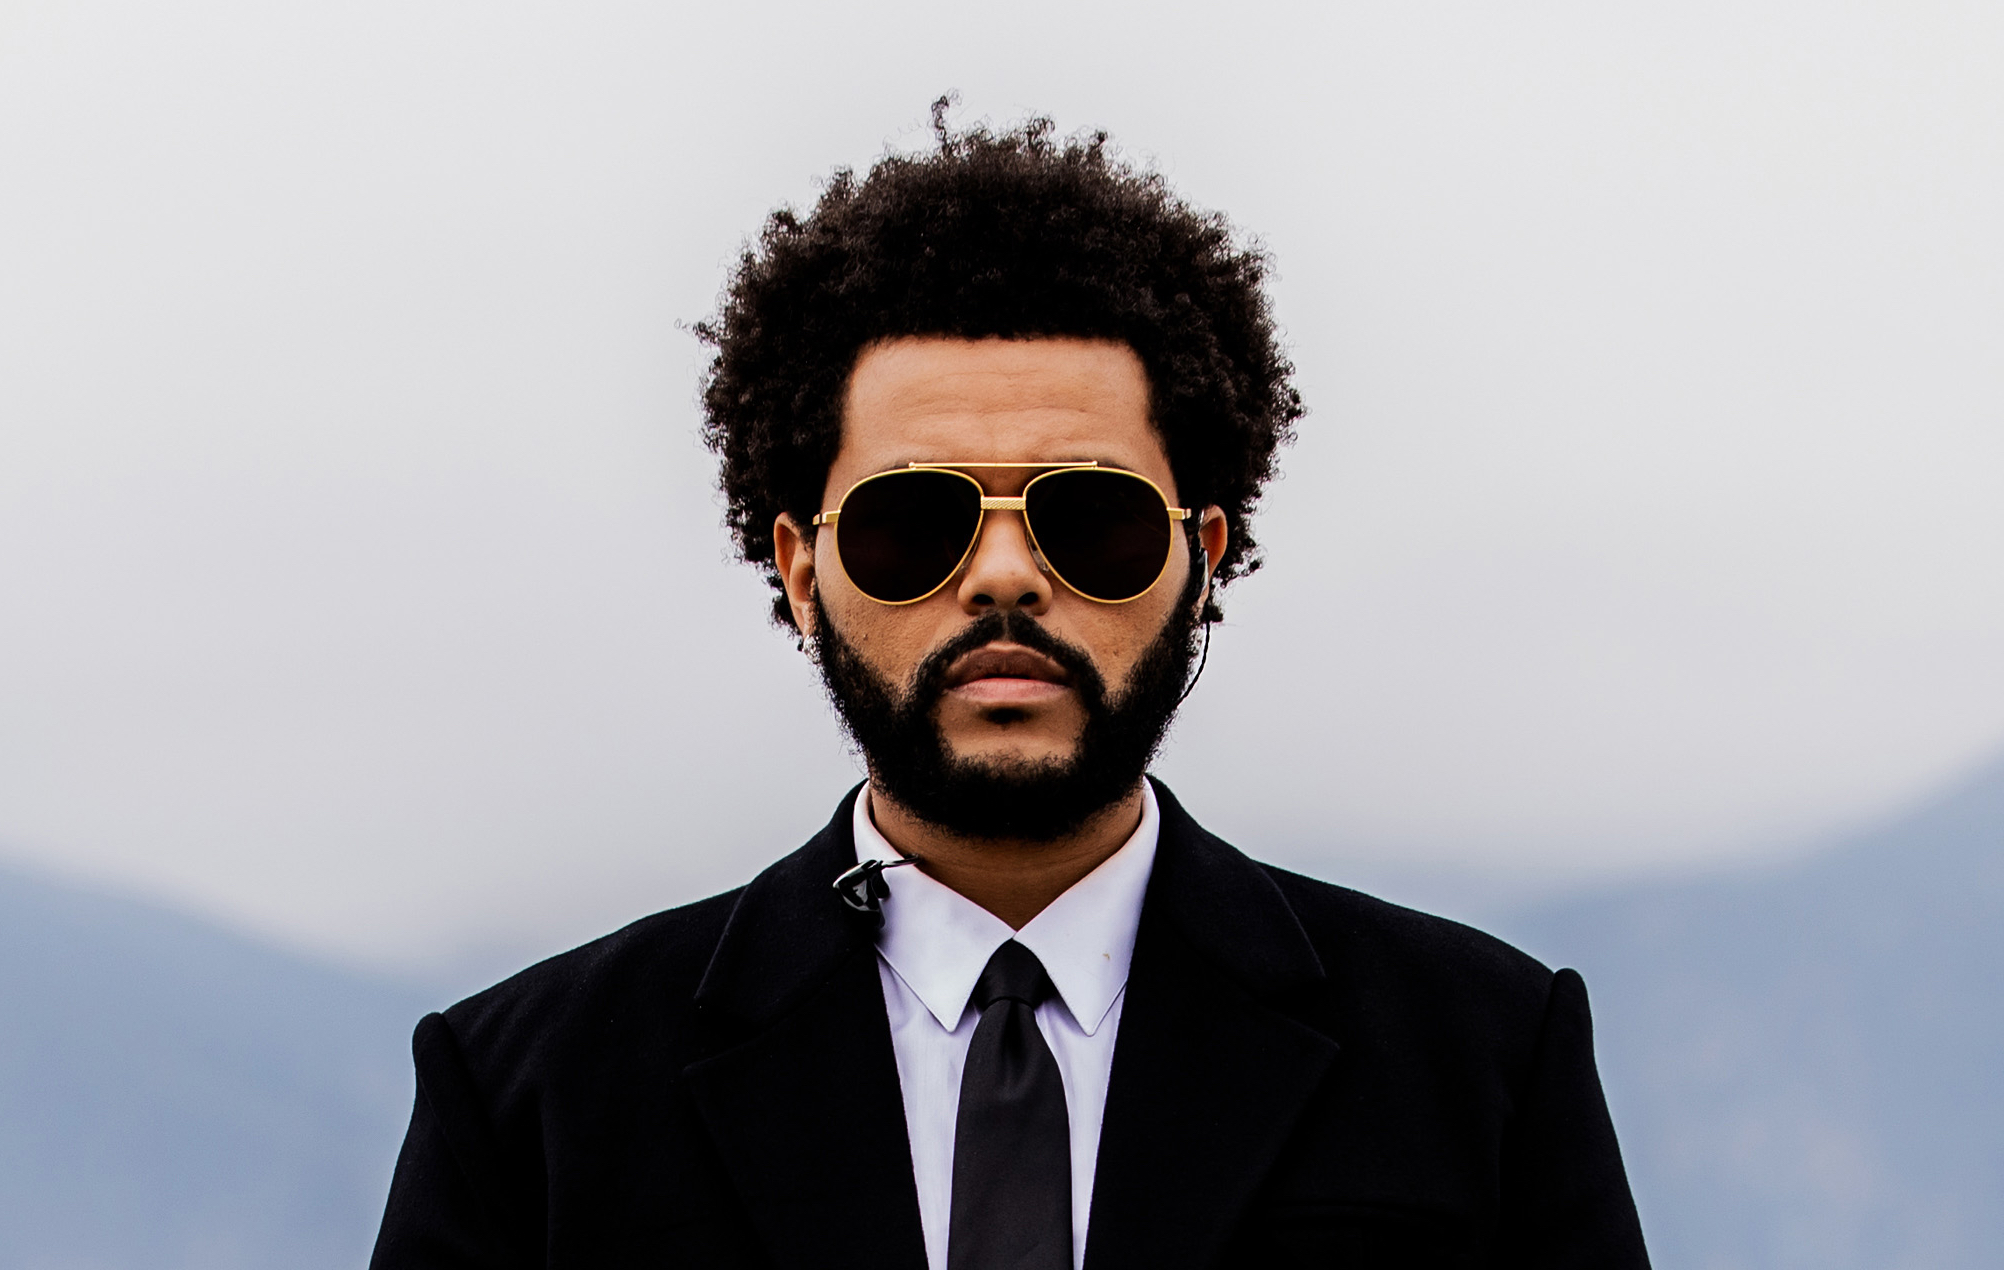 The Weeknd and Universal Music Group Announce Expansion of Joint Global Partnership #TheWeeknd